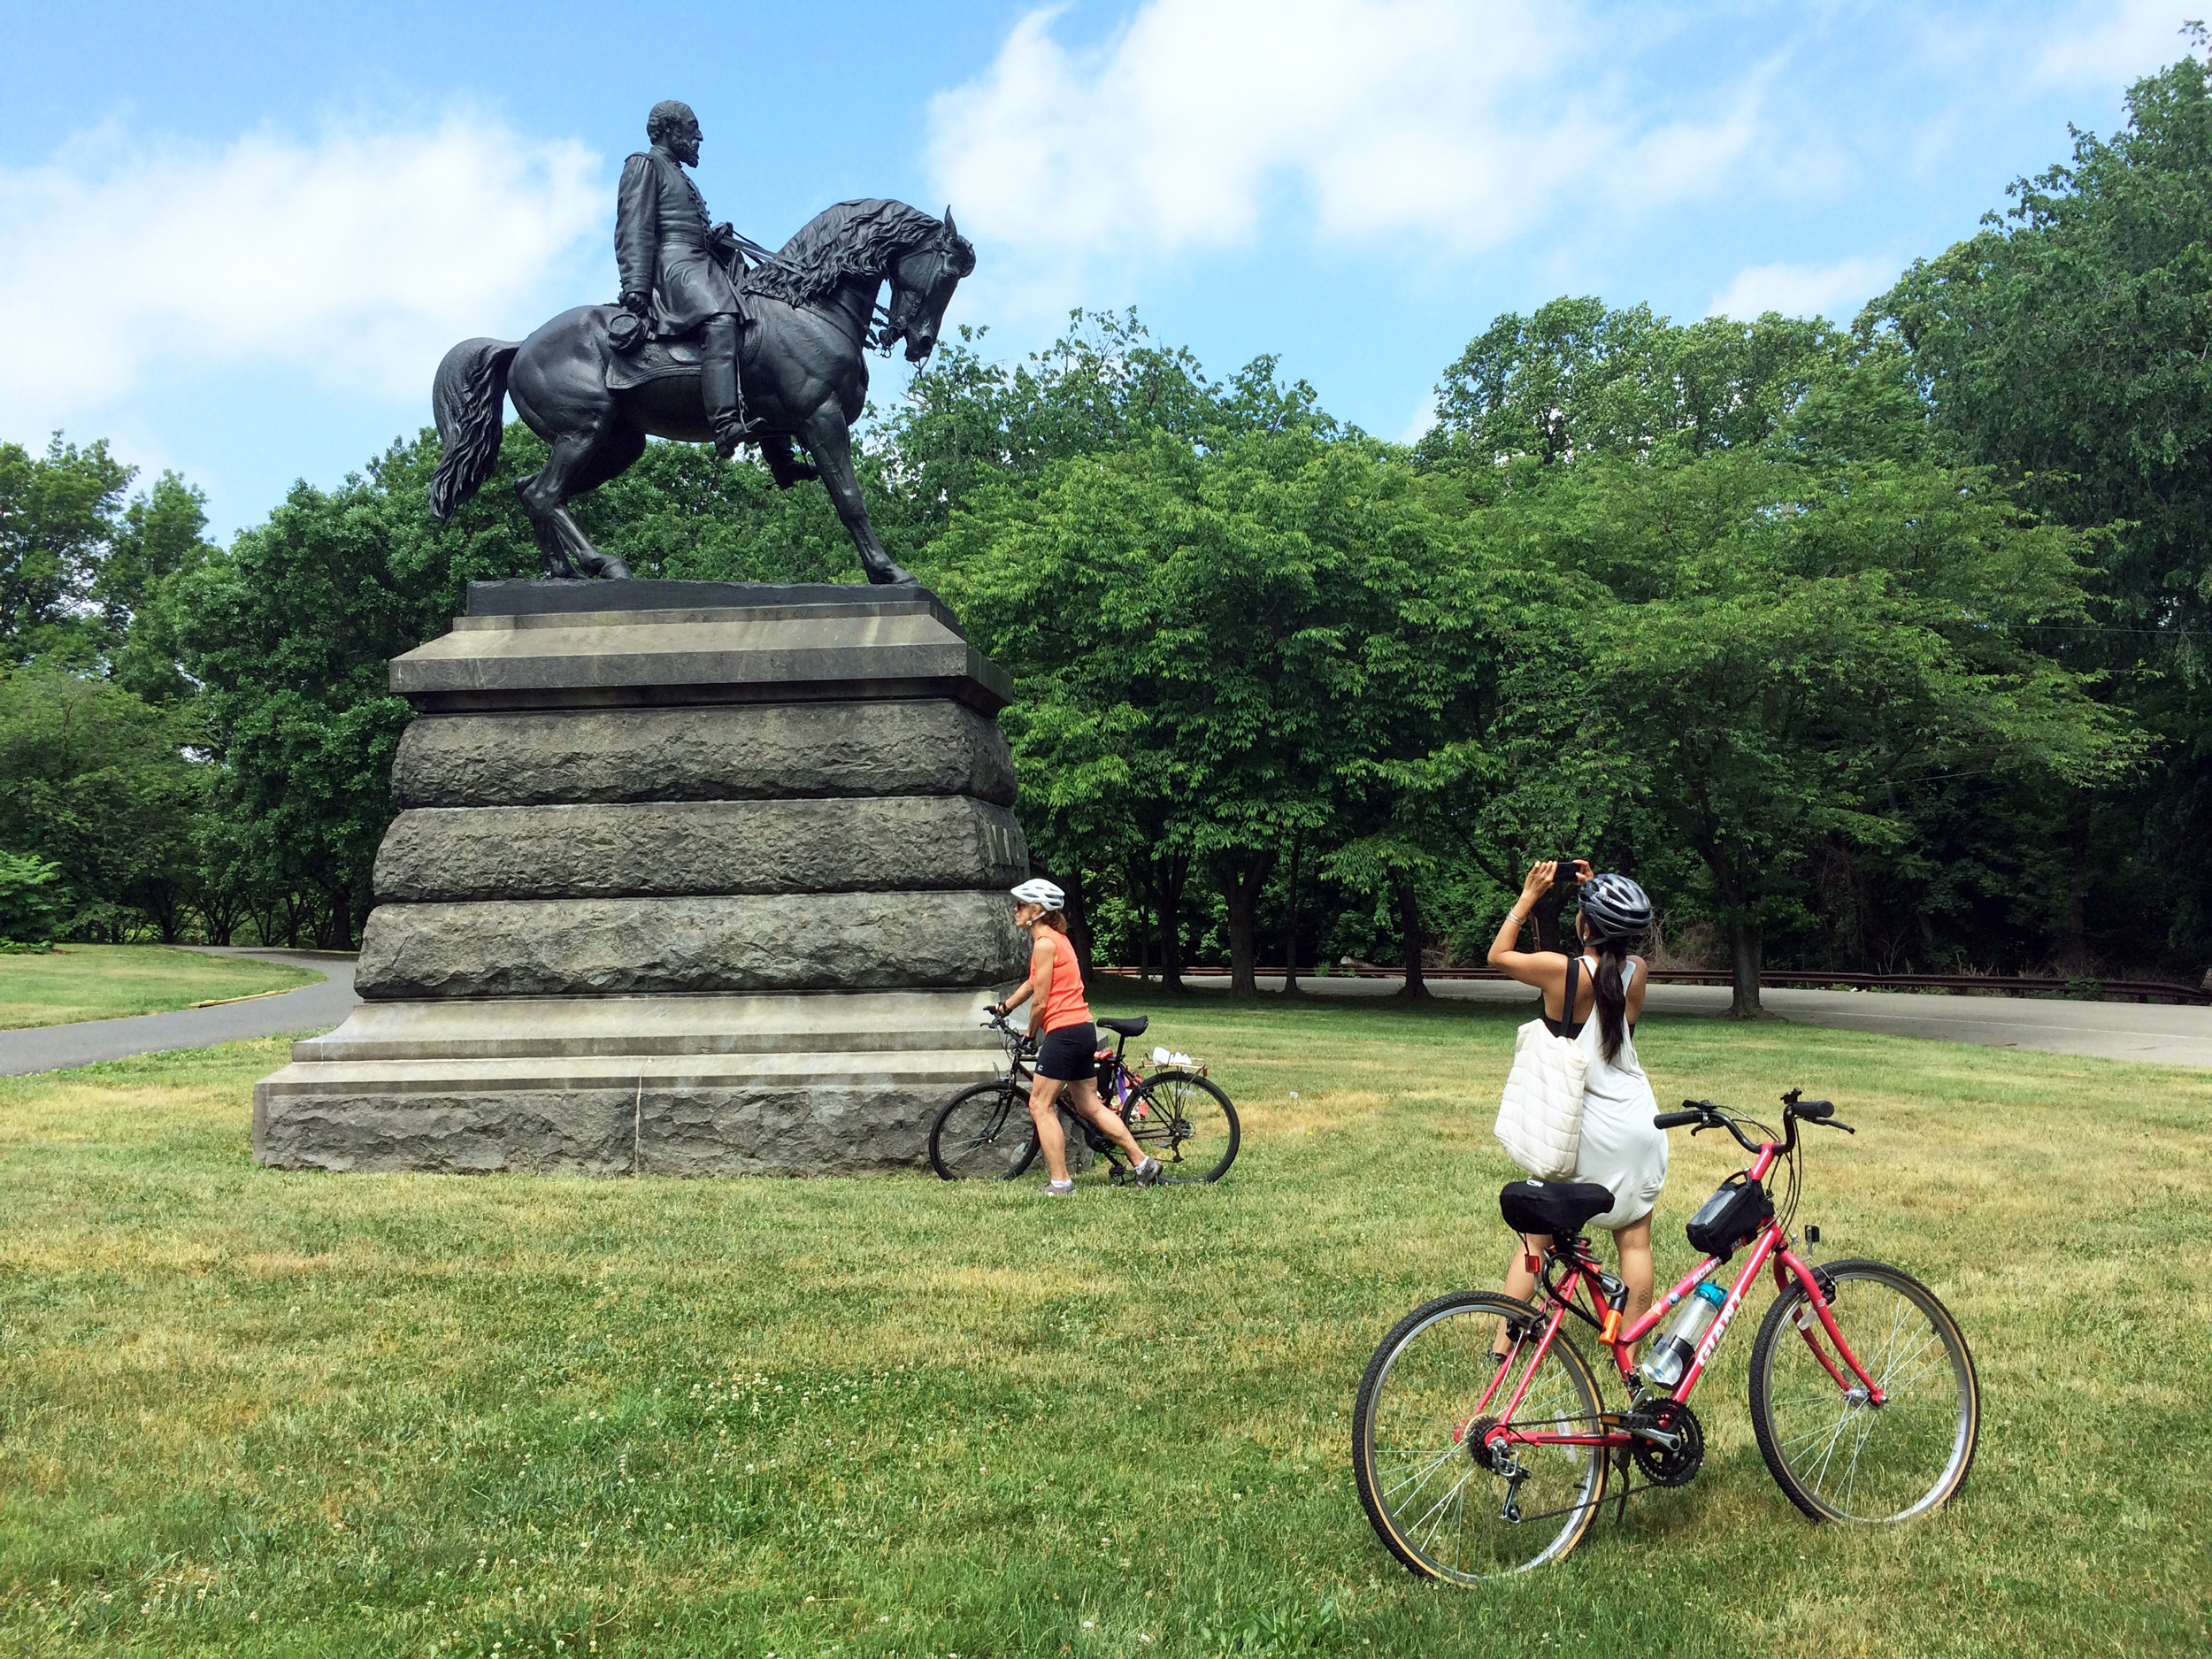 Two female cyclists at the Meade bronze equestrian in Fairmount Park. One of the cyclists stops to take a picture of the monument, which stands on a tall stone base.